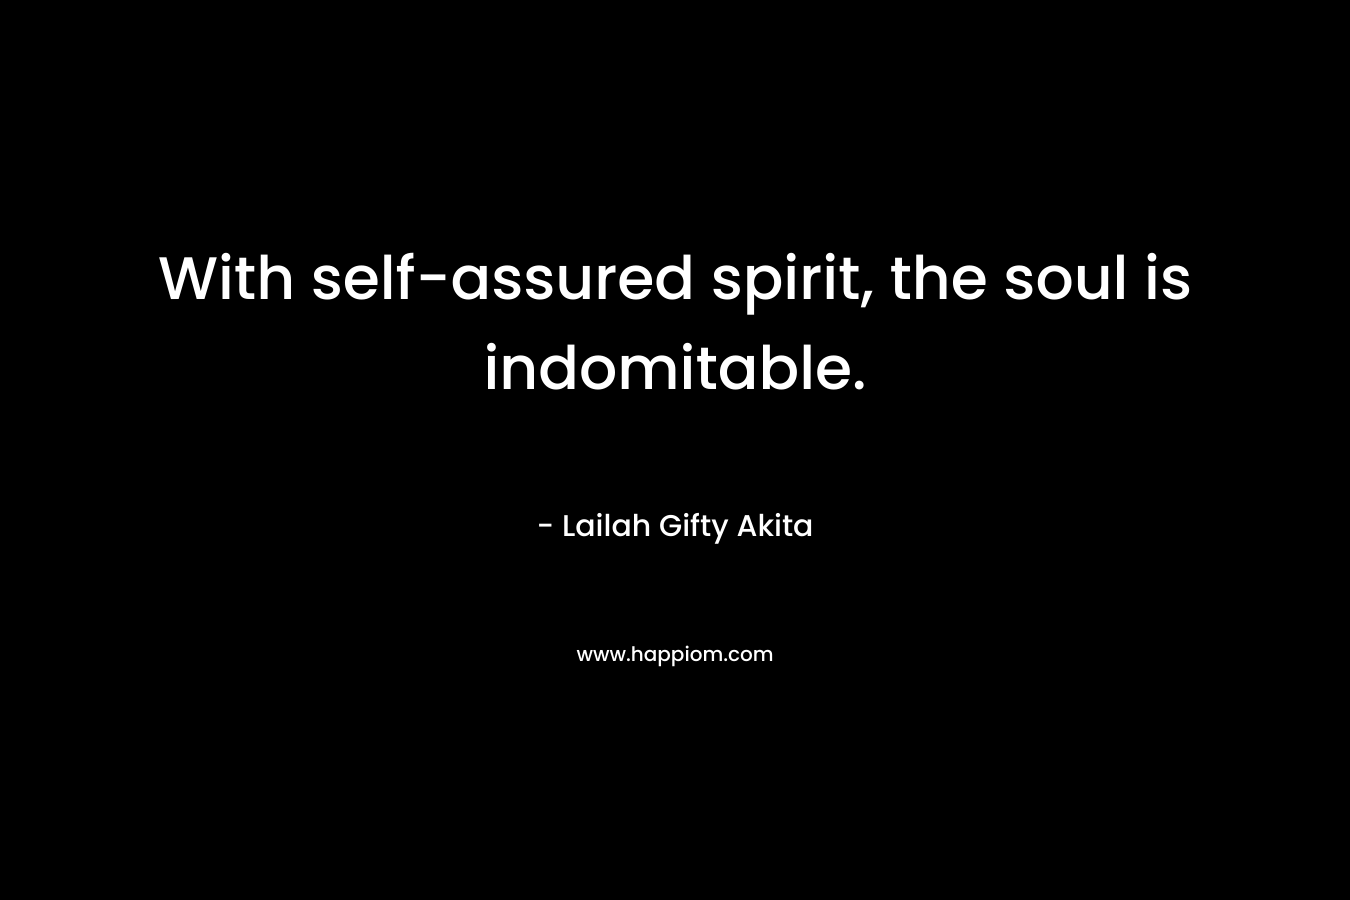 With self-assured spirit, the soul is indomitable.